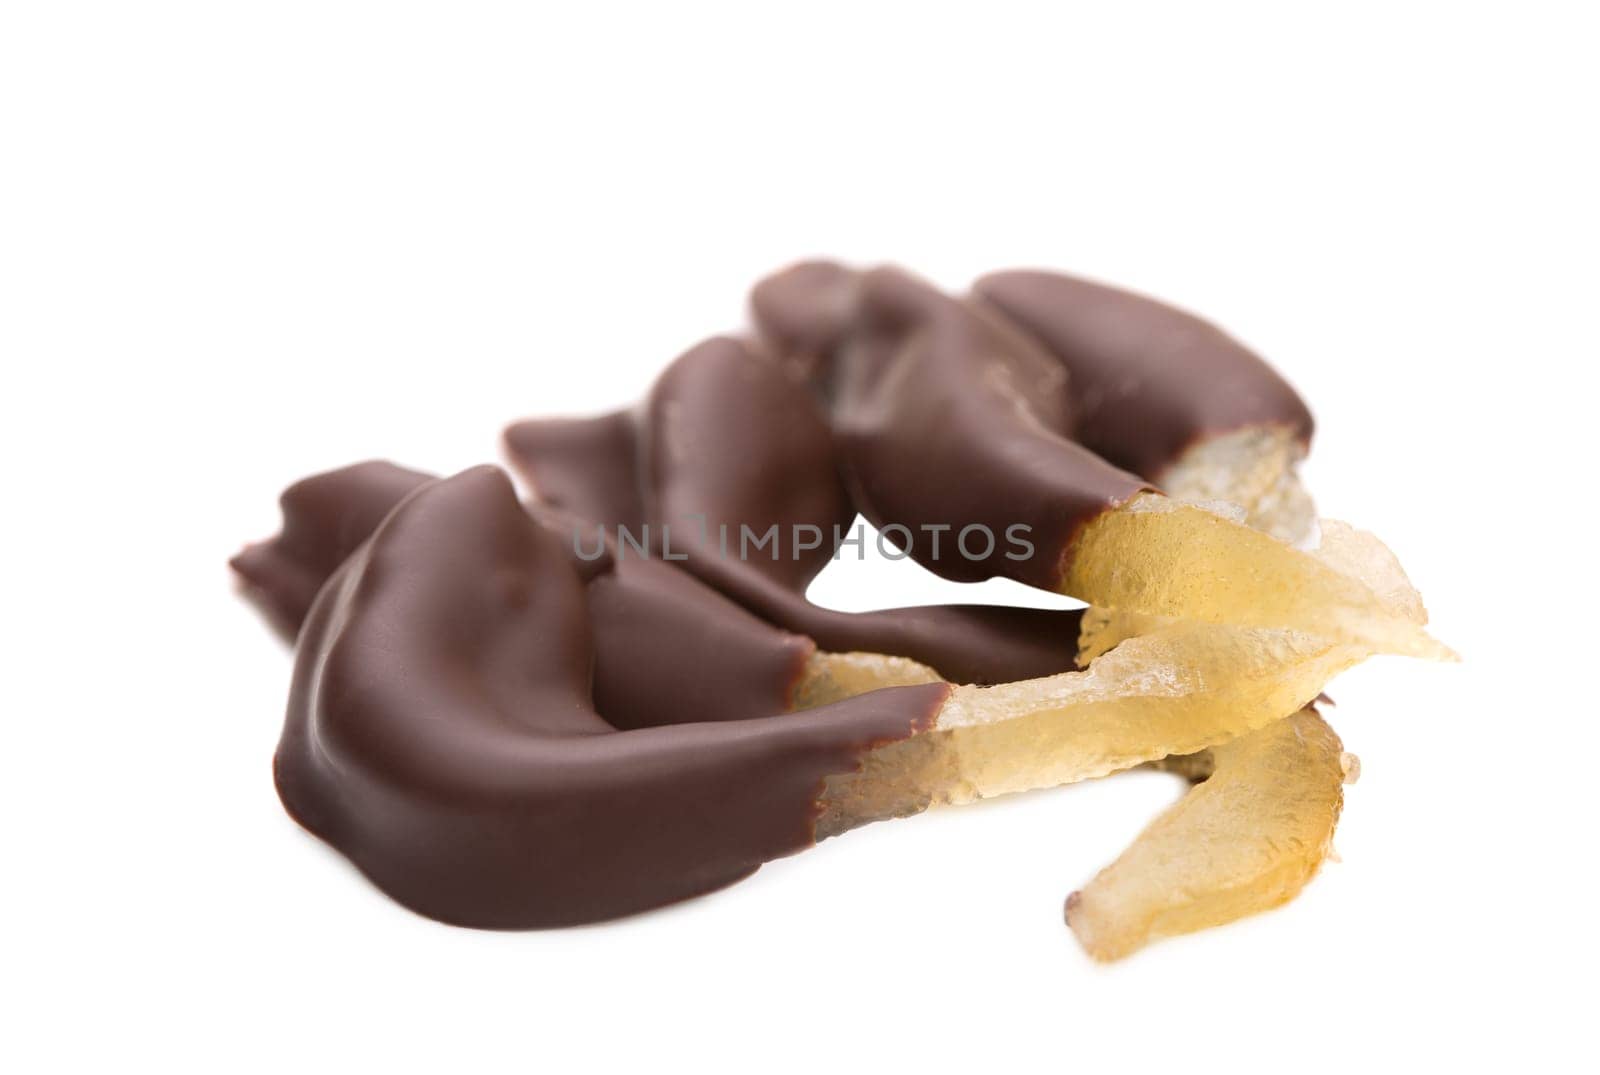 Image of lemon slices dipped in chocolate, isolated on white